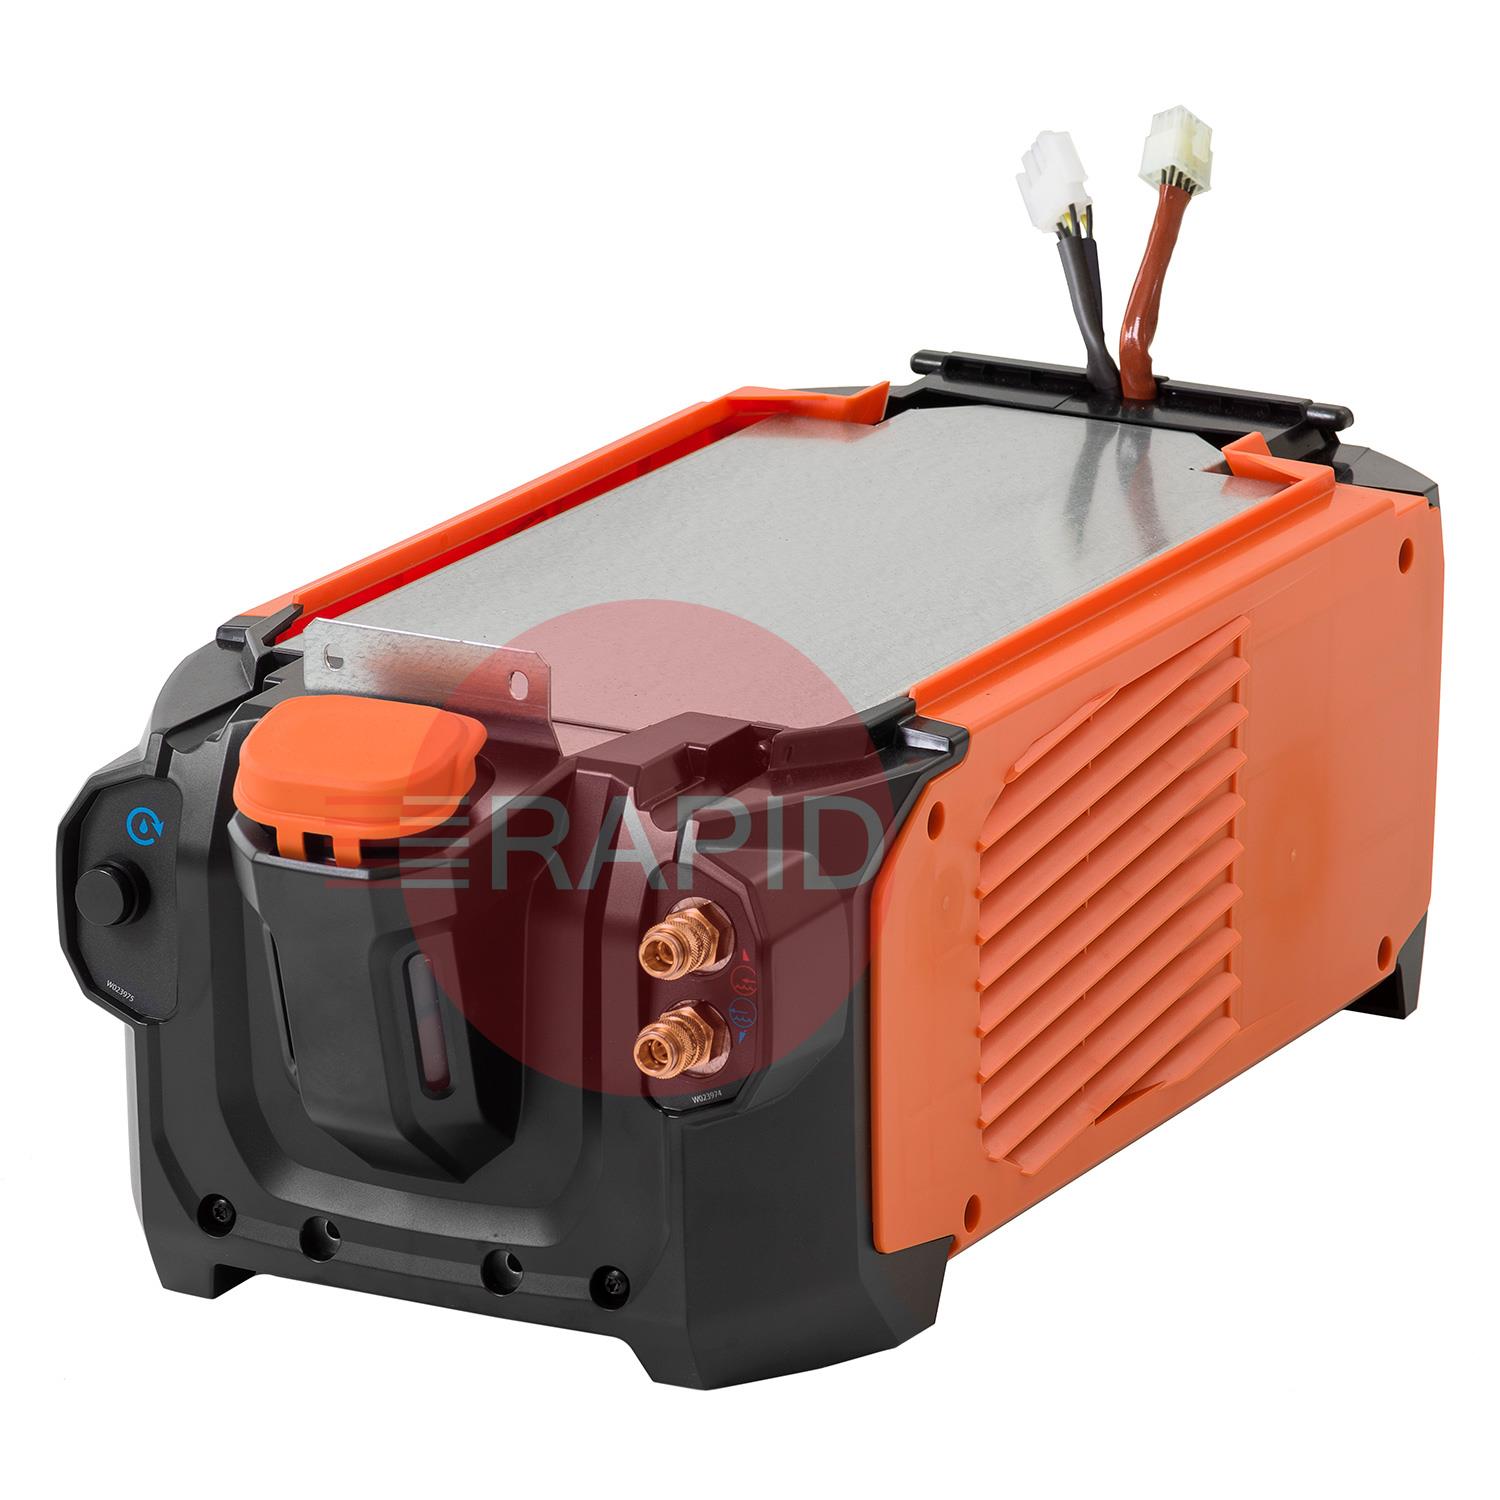 P23T355W4R  Kemppi Minarc T 223 AC/DC GM TIG Welder Water Cooled Package, with TX 355W 4m Torch & Foot Pedal - 110/240v, 1ph